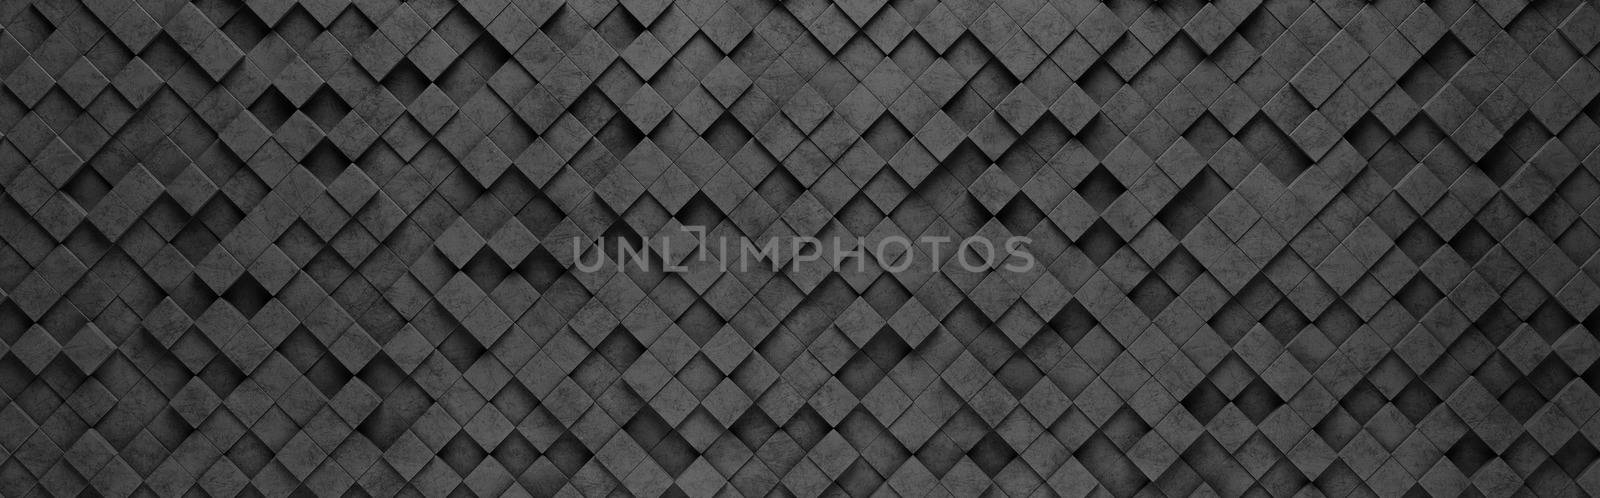 Wall of Small Black Squares Tiles Arranged in Random Height 3D Pattern Background Illustration